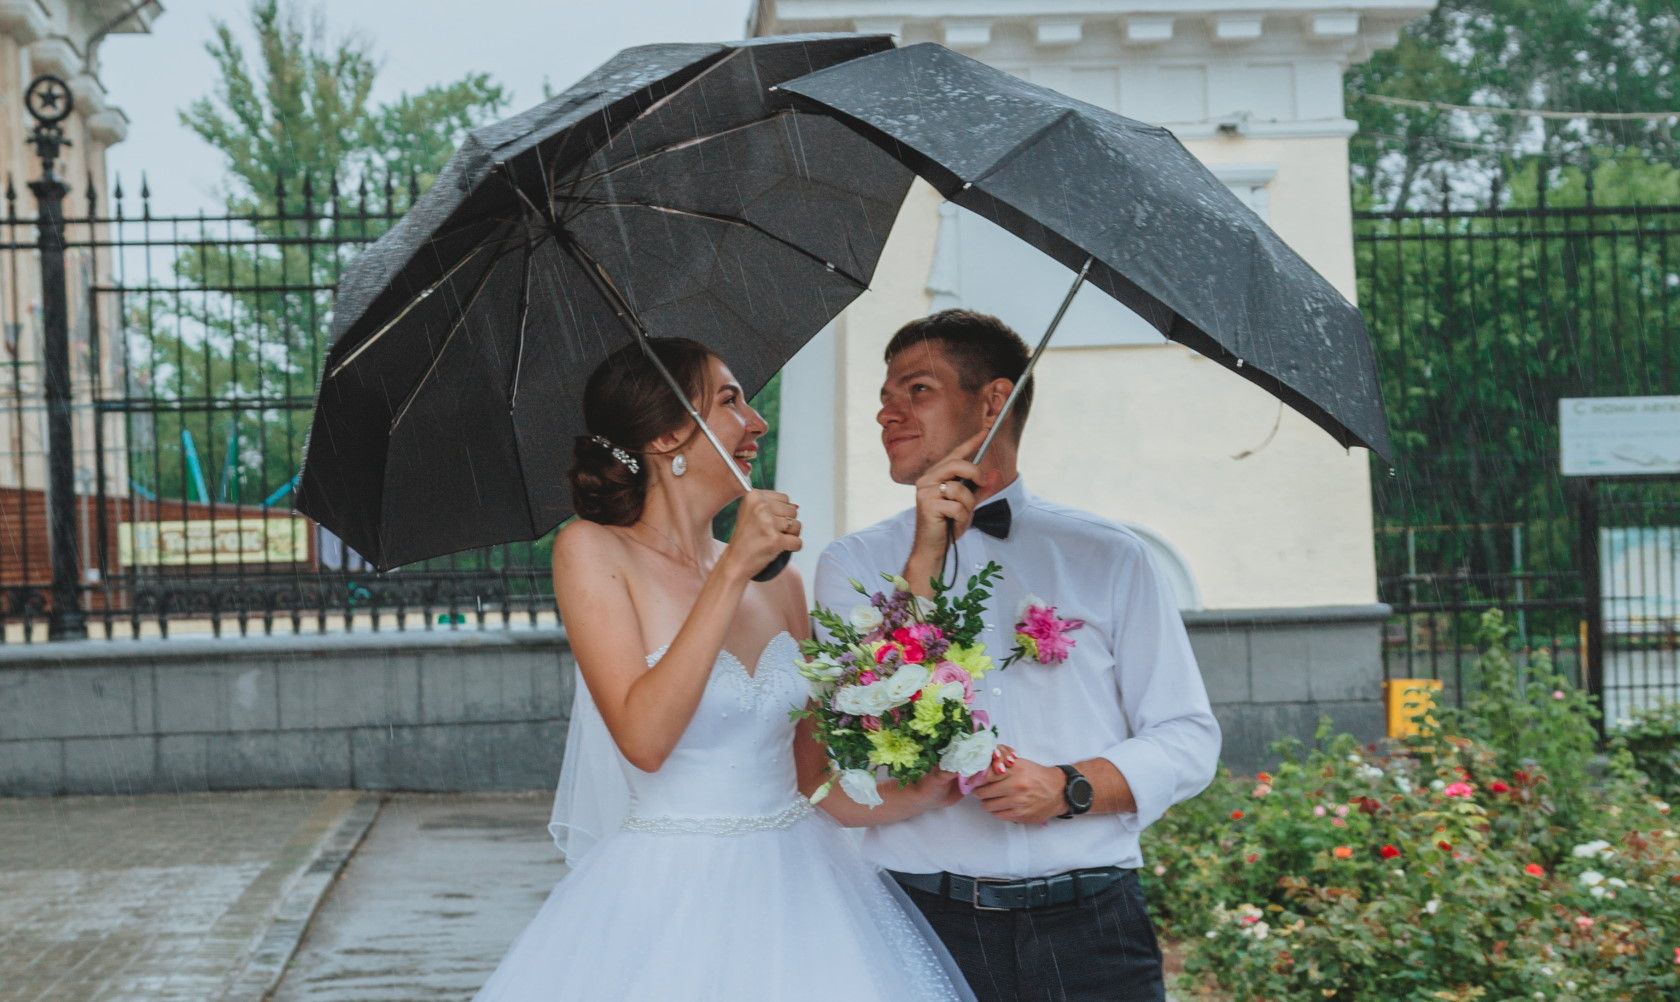 bride and groom standing outside holding umbrellas in the rain